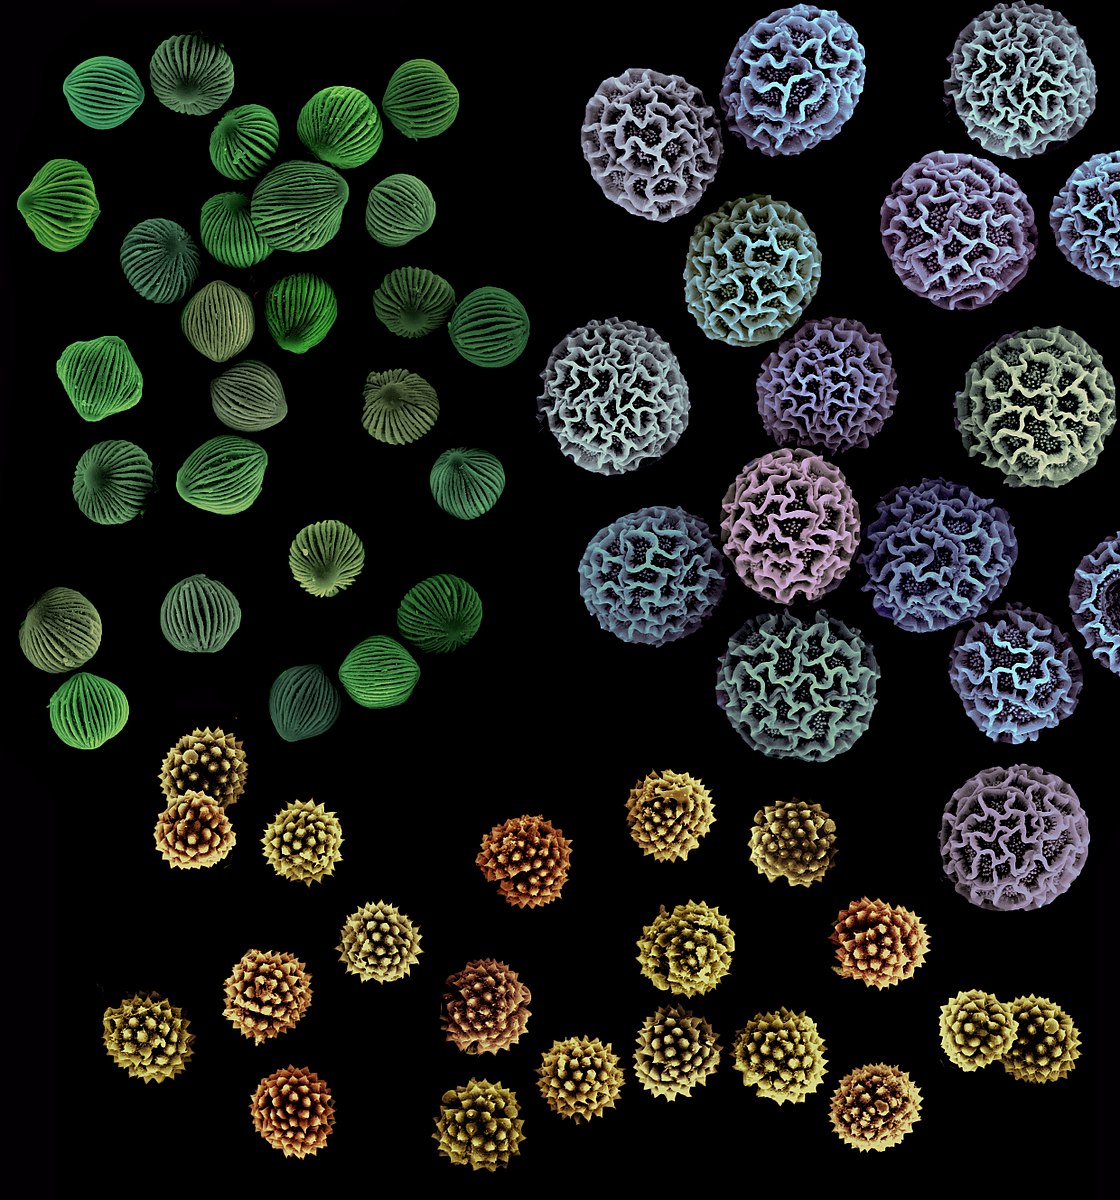 Three types of pollen, each with a different pattern on its surface